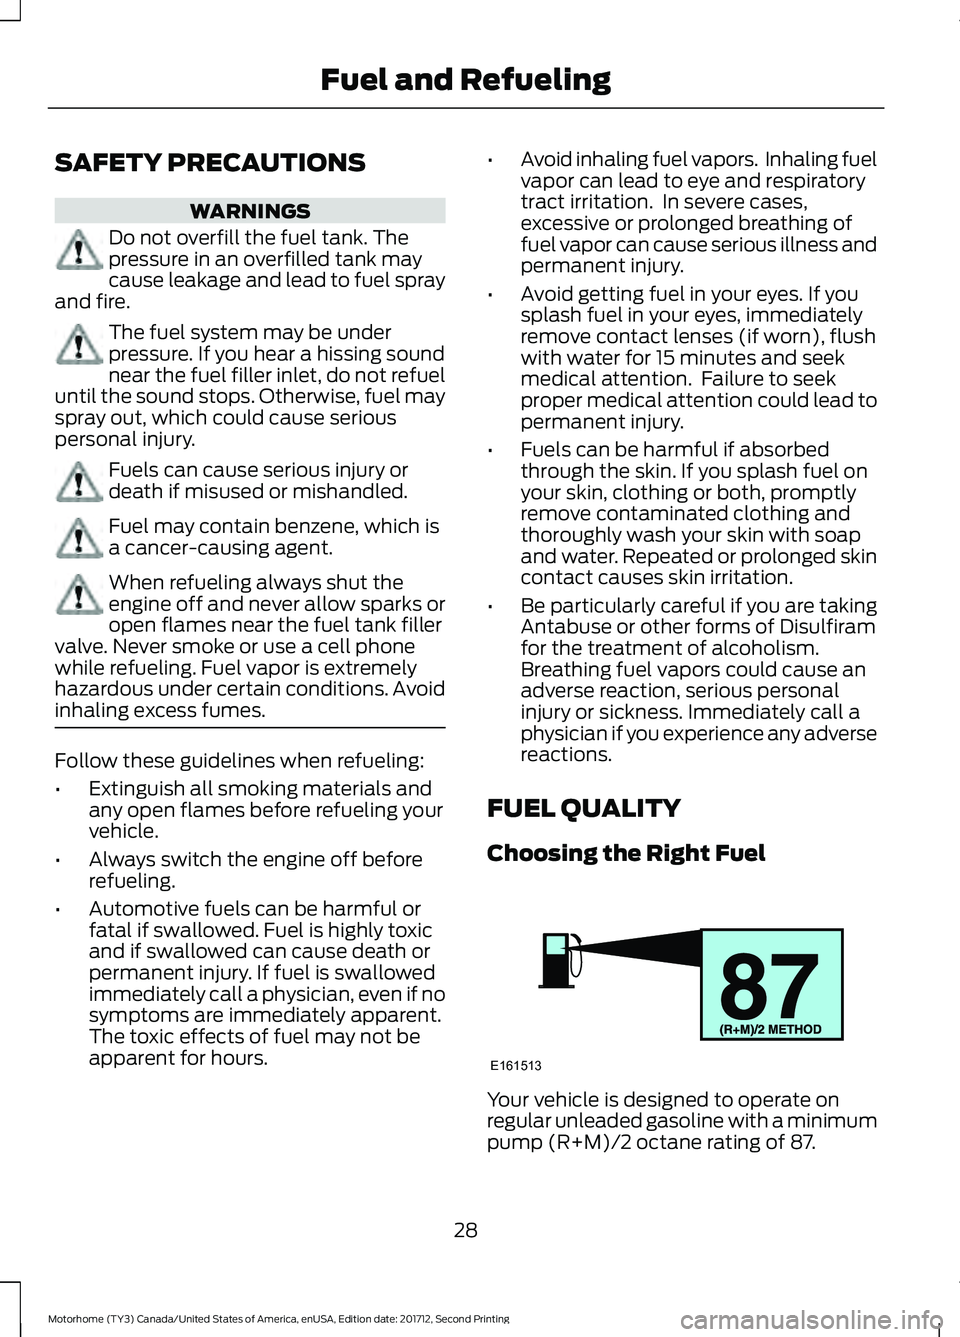 FORD F-59 2018  Owners Manual SAFETY PRECAUTIONS
WARNINGS
Do not overfill the fuel tank. The
pressure in an overfilled tank may
cause leakage and lead to fuel spray
and fire. The fuel system may be under
pressure. If you hear a hi